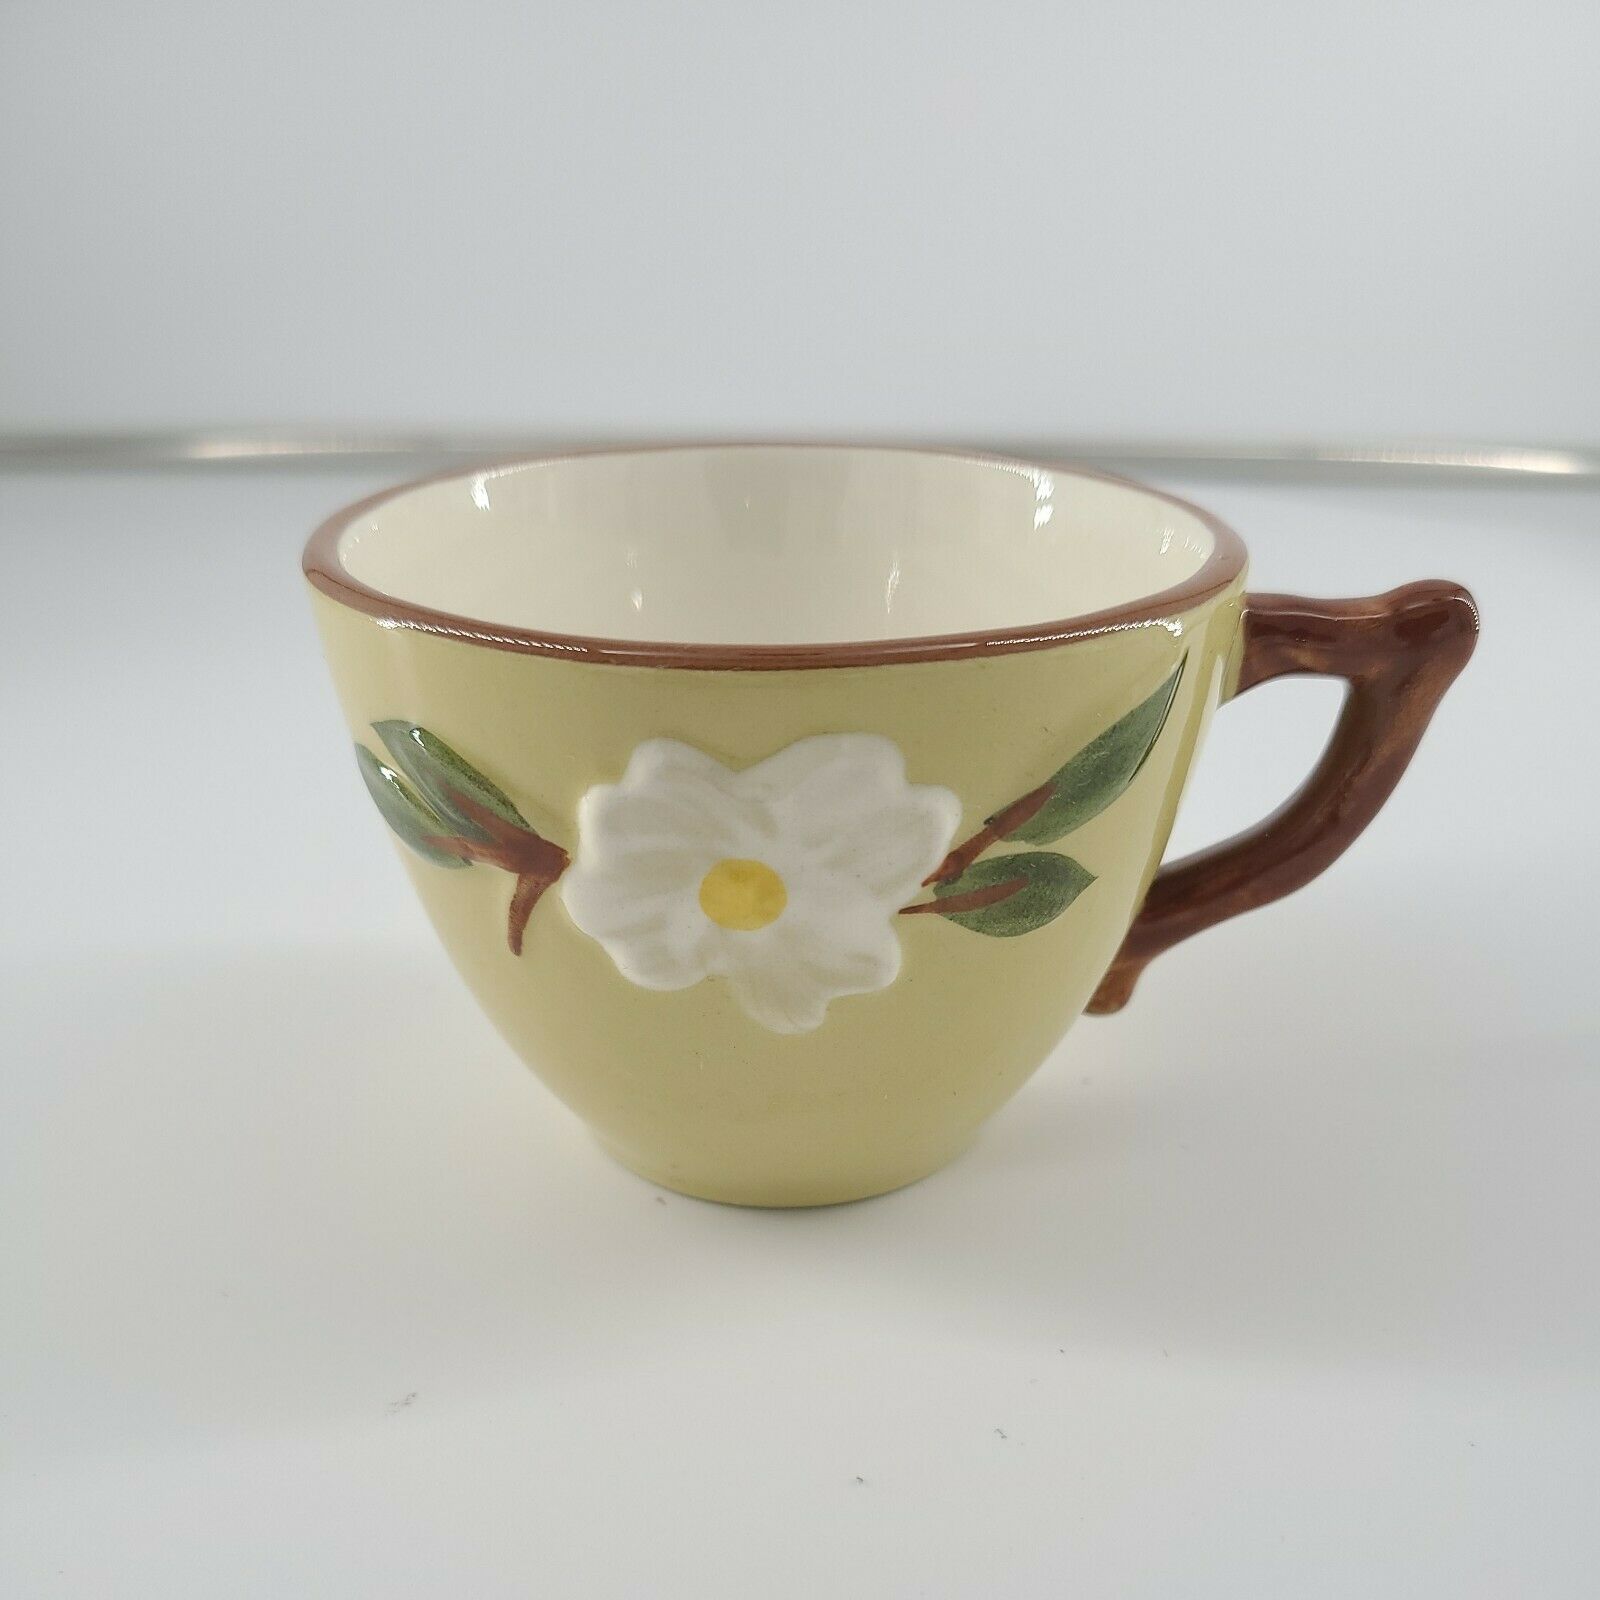 Stangl Pottery Teacup White Dogwood Redware Replacement Flower